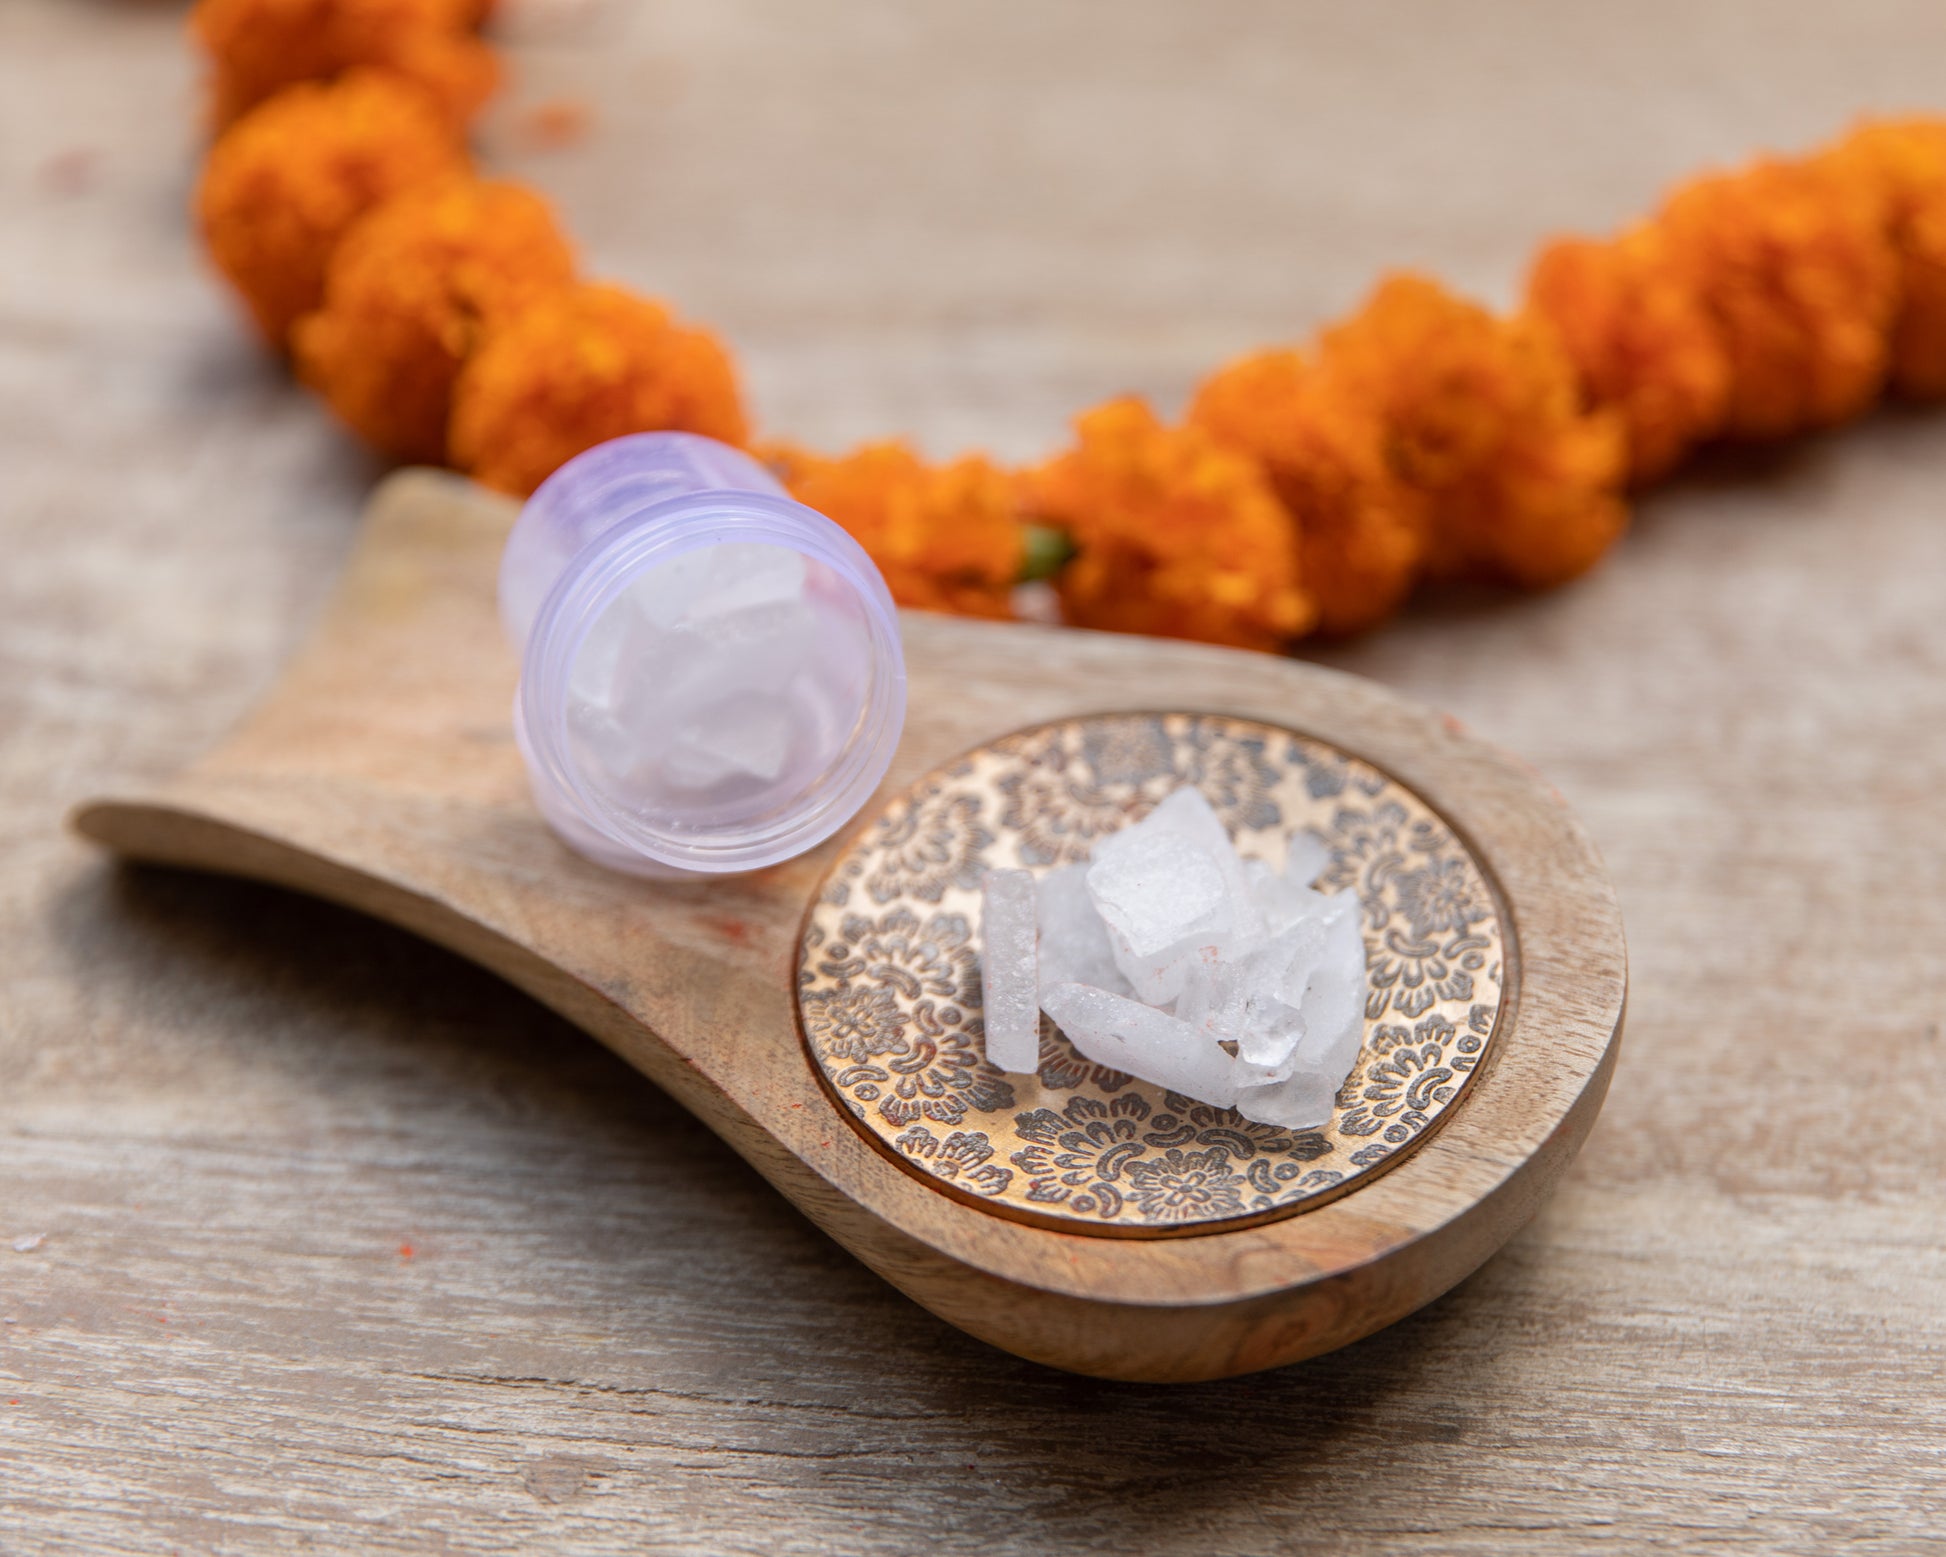 Kapur/Camphor is lit and used in hawan ceremonies, aarti, and other forms of worship